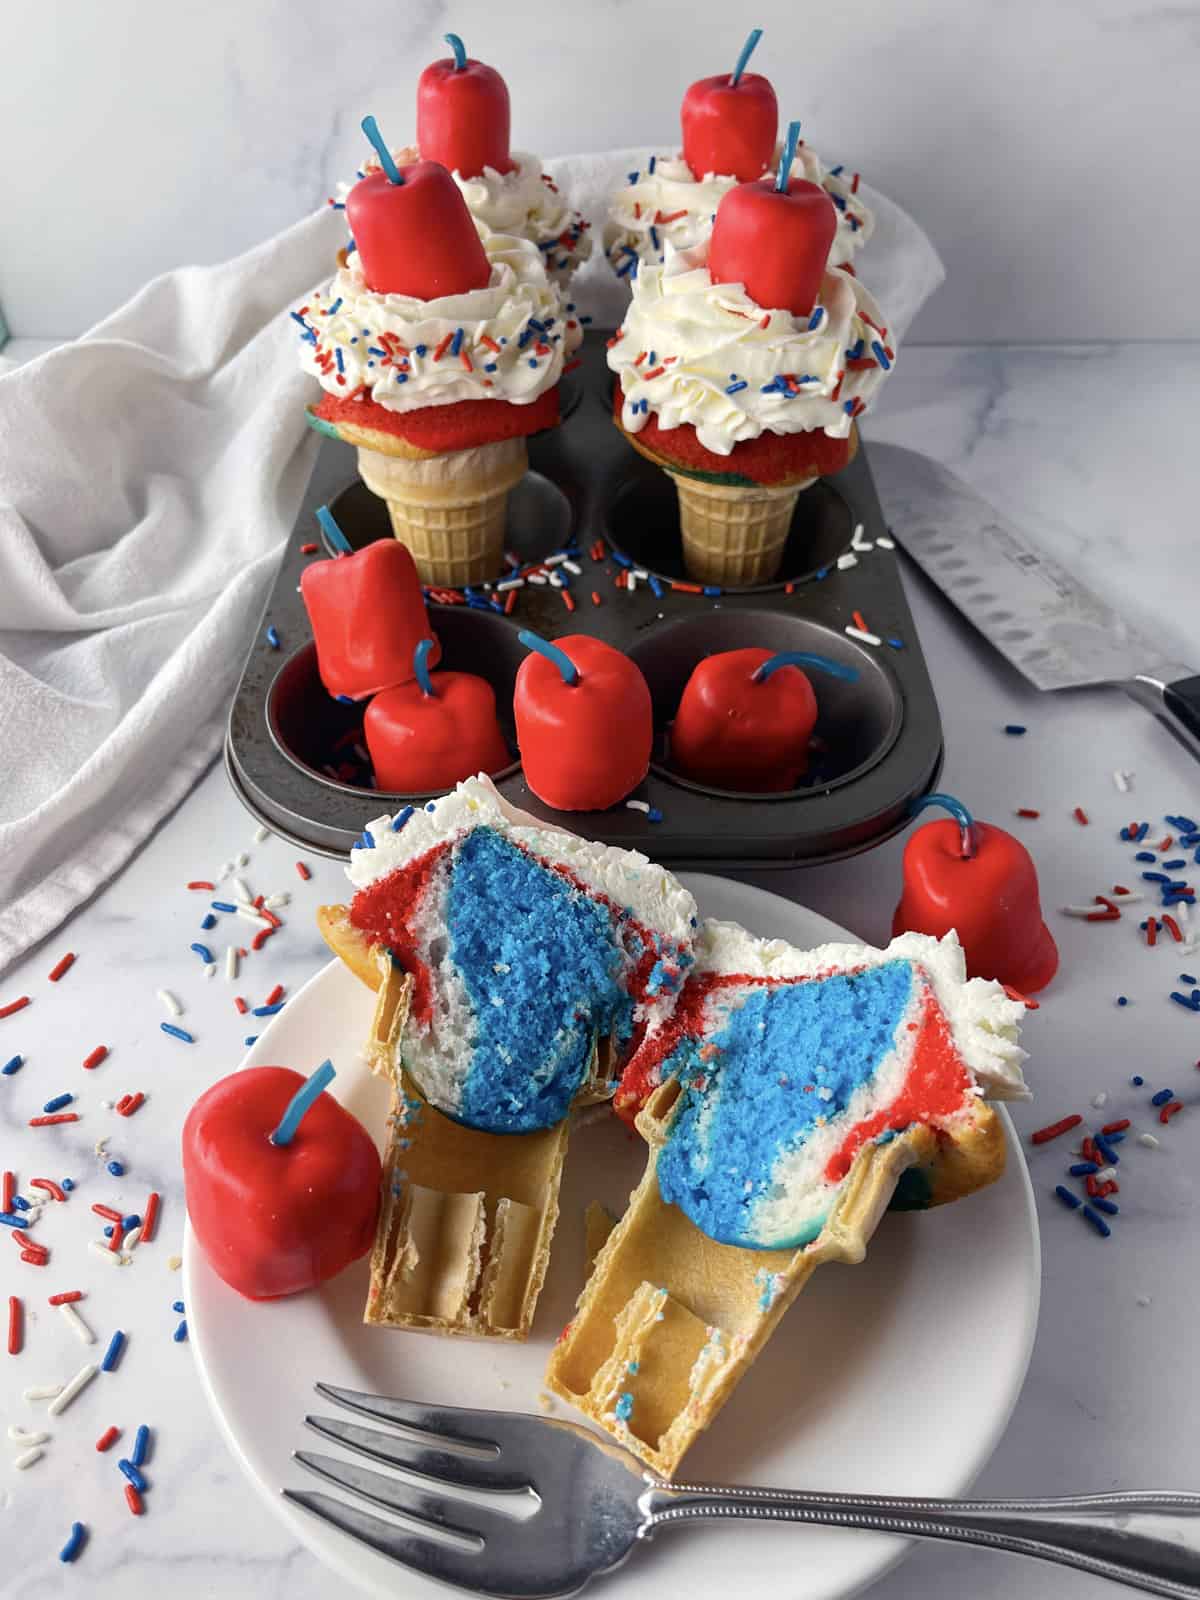 https://www.momlovesbaking.com/wp-content/uploads/2023/05/July-4th-cupcakes.jpg